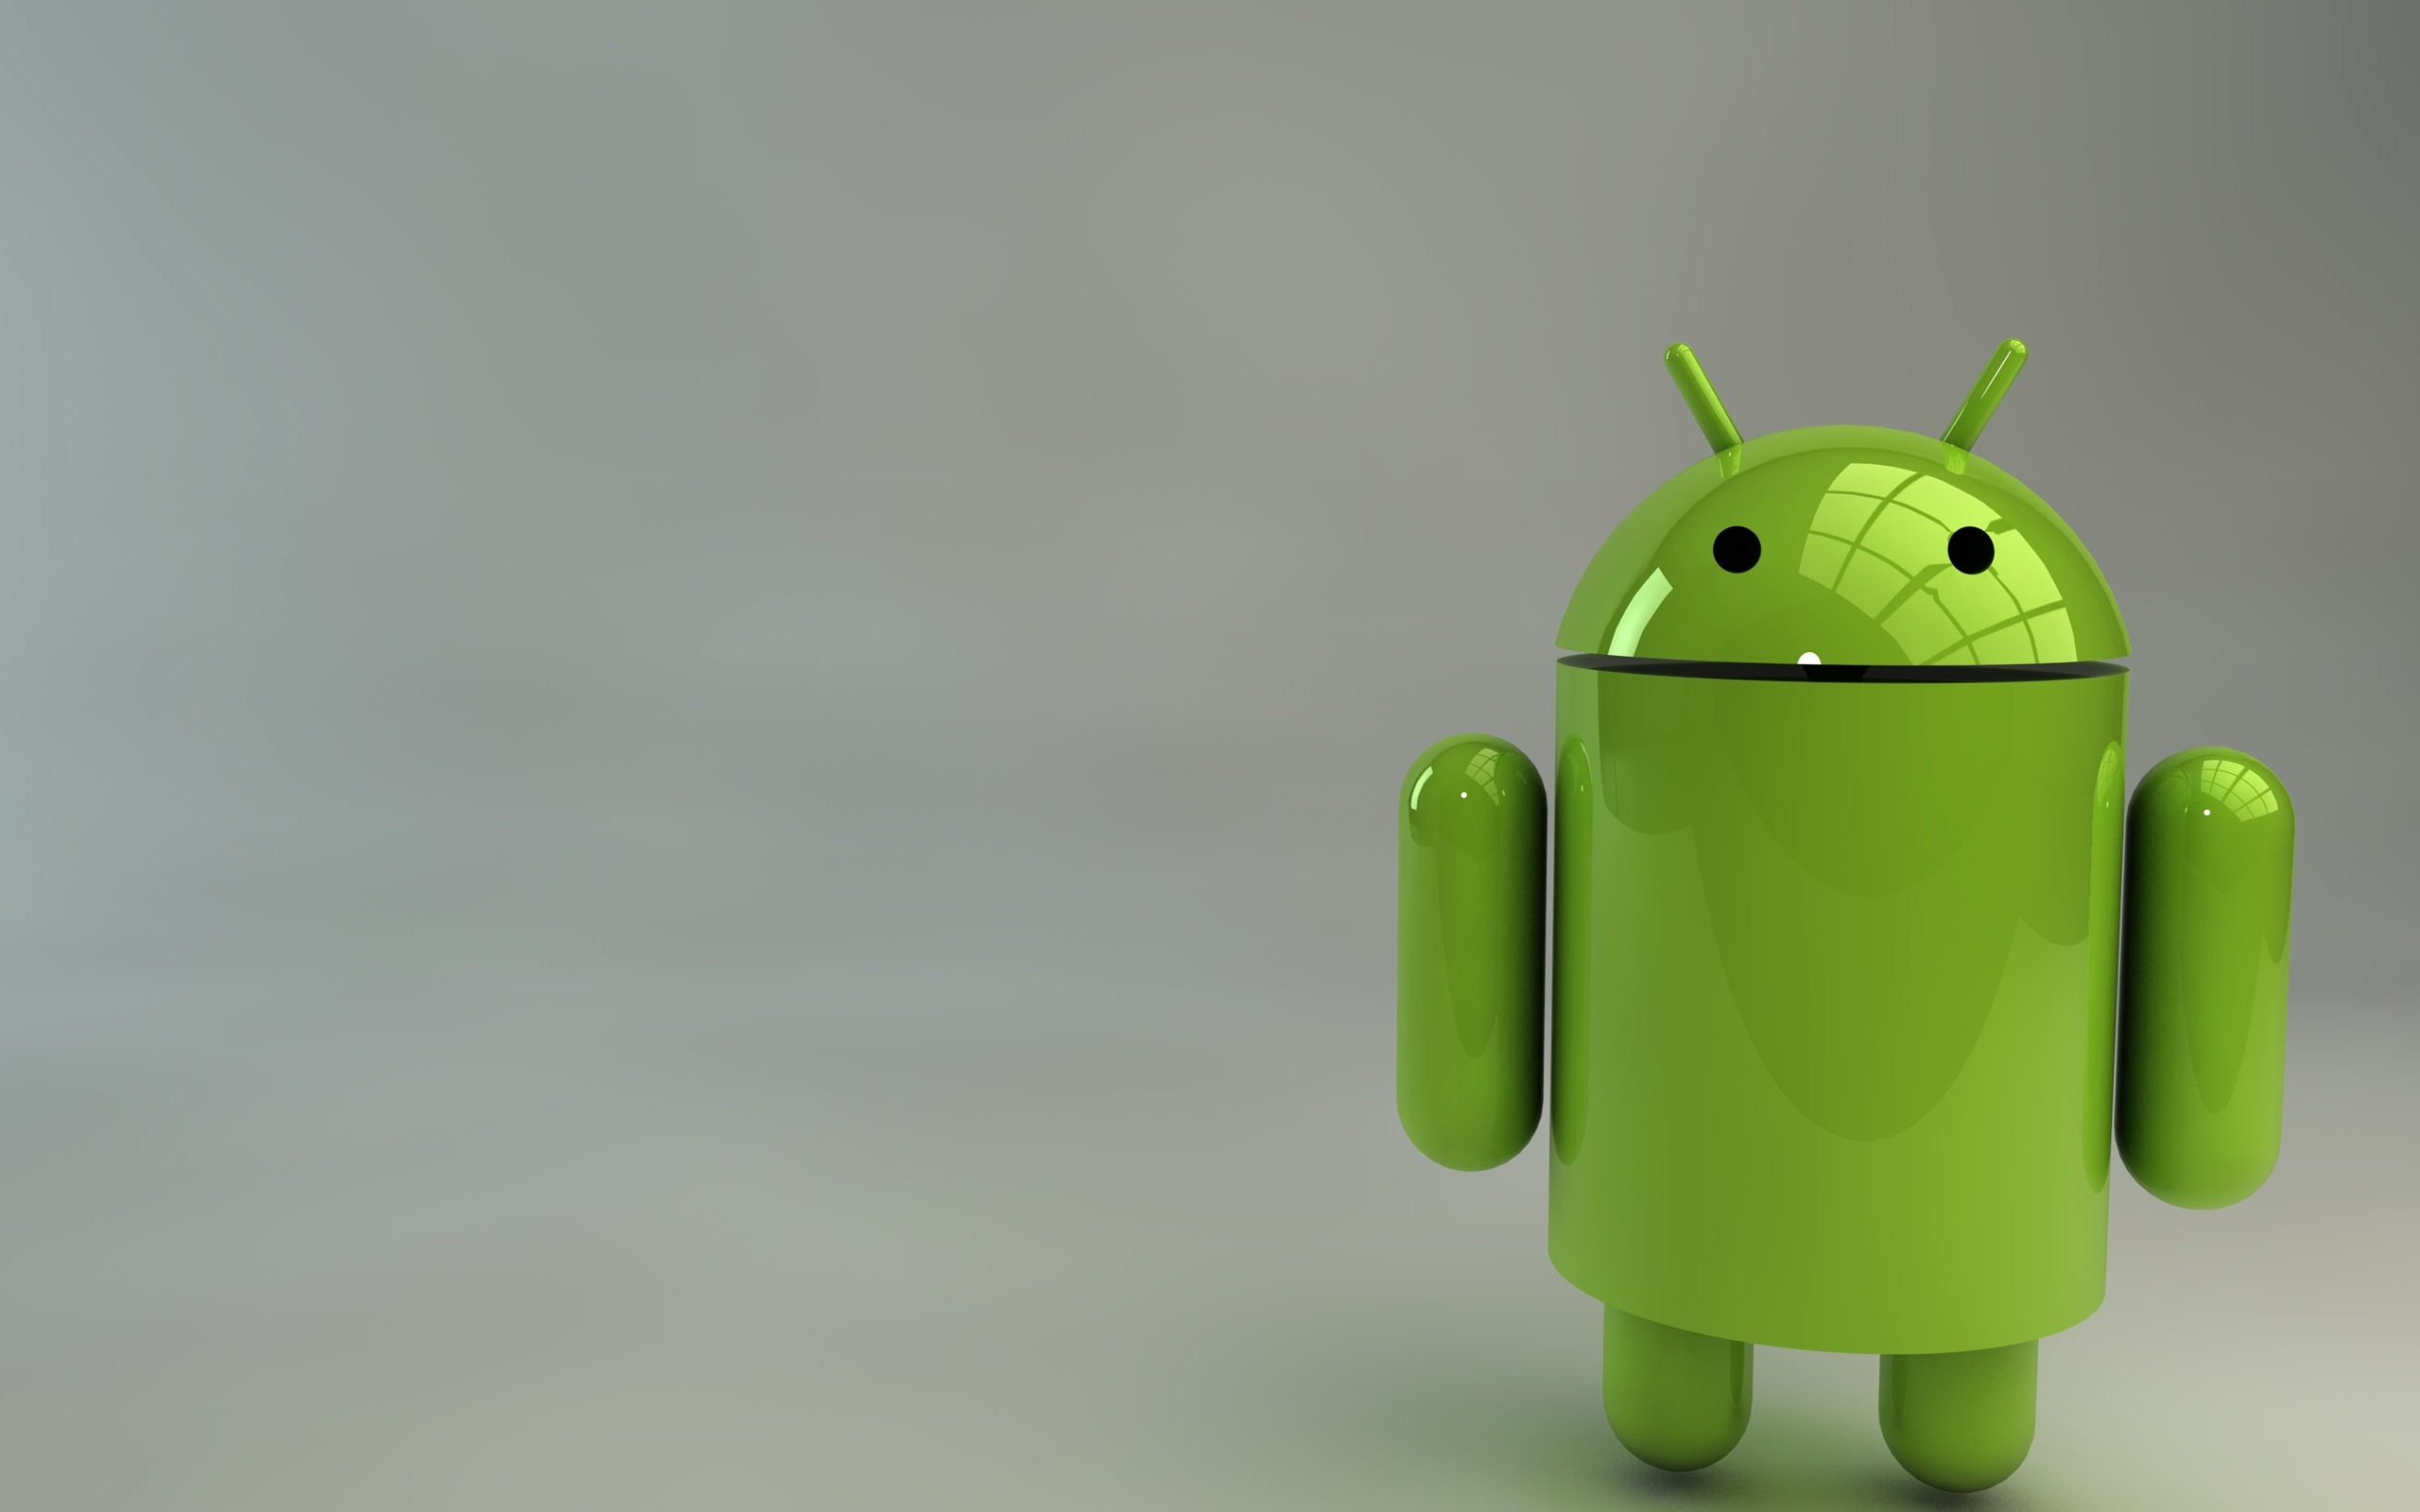 Free download Colourful 3D Android Wallpaper Free Desktop Backgrounds